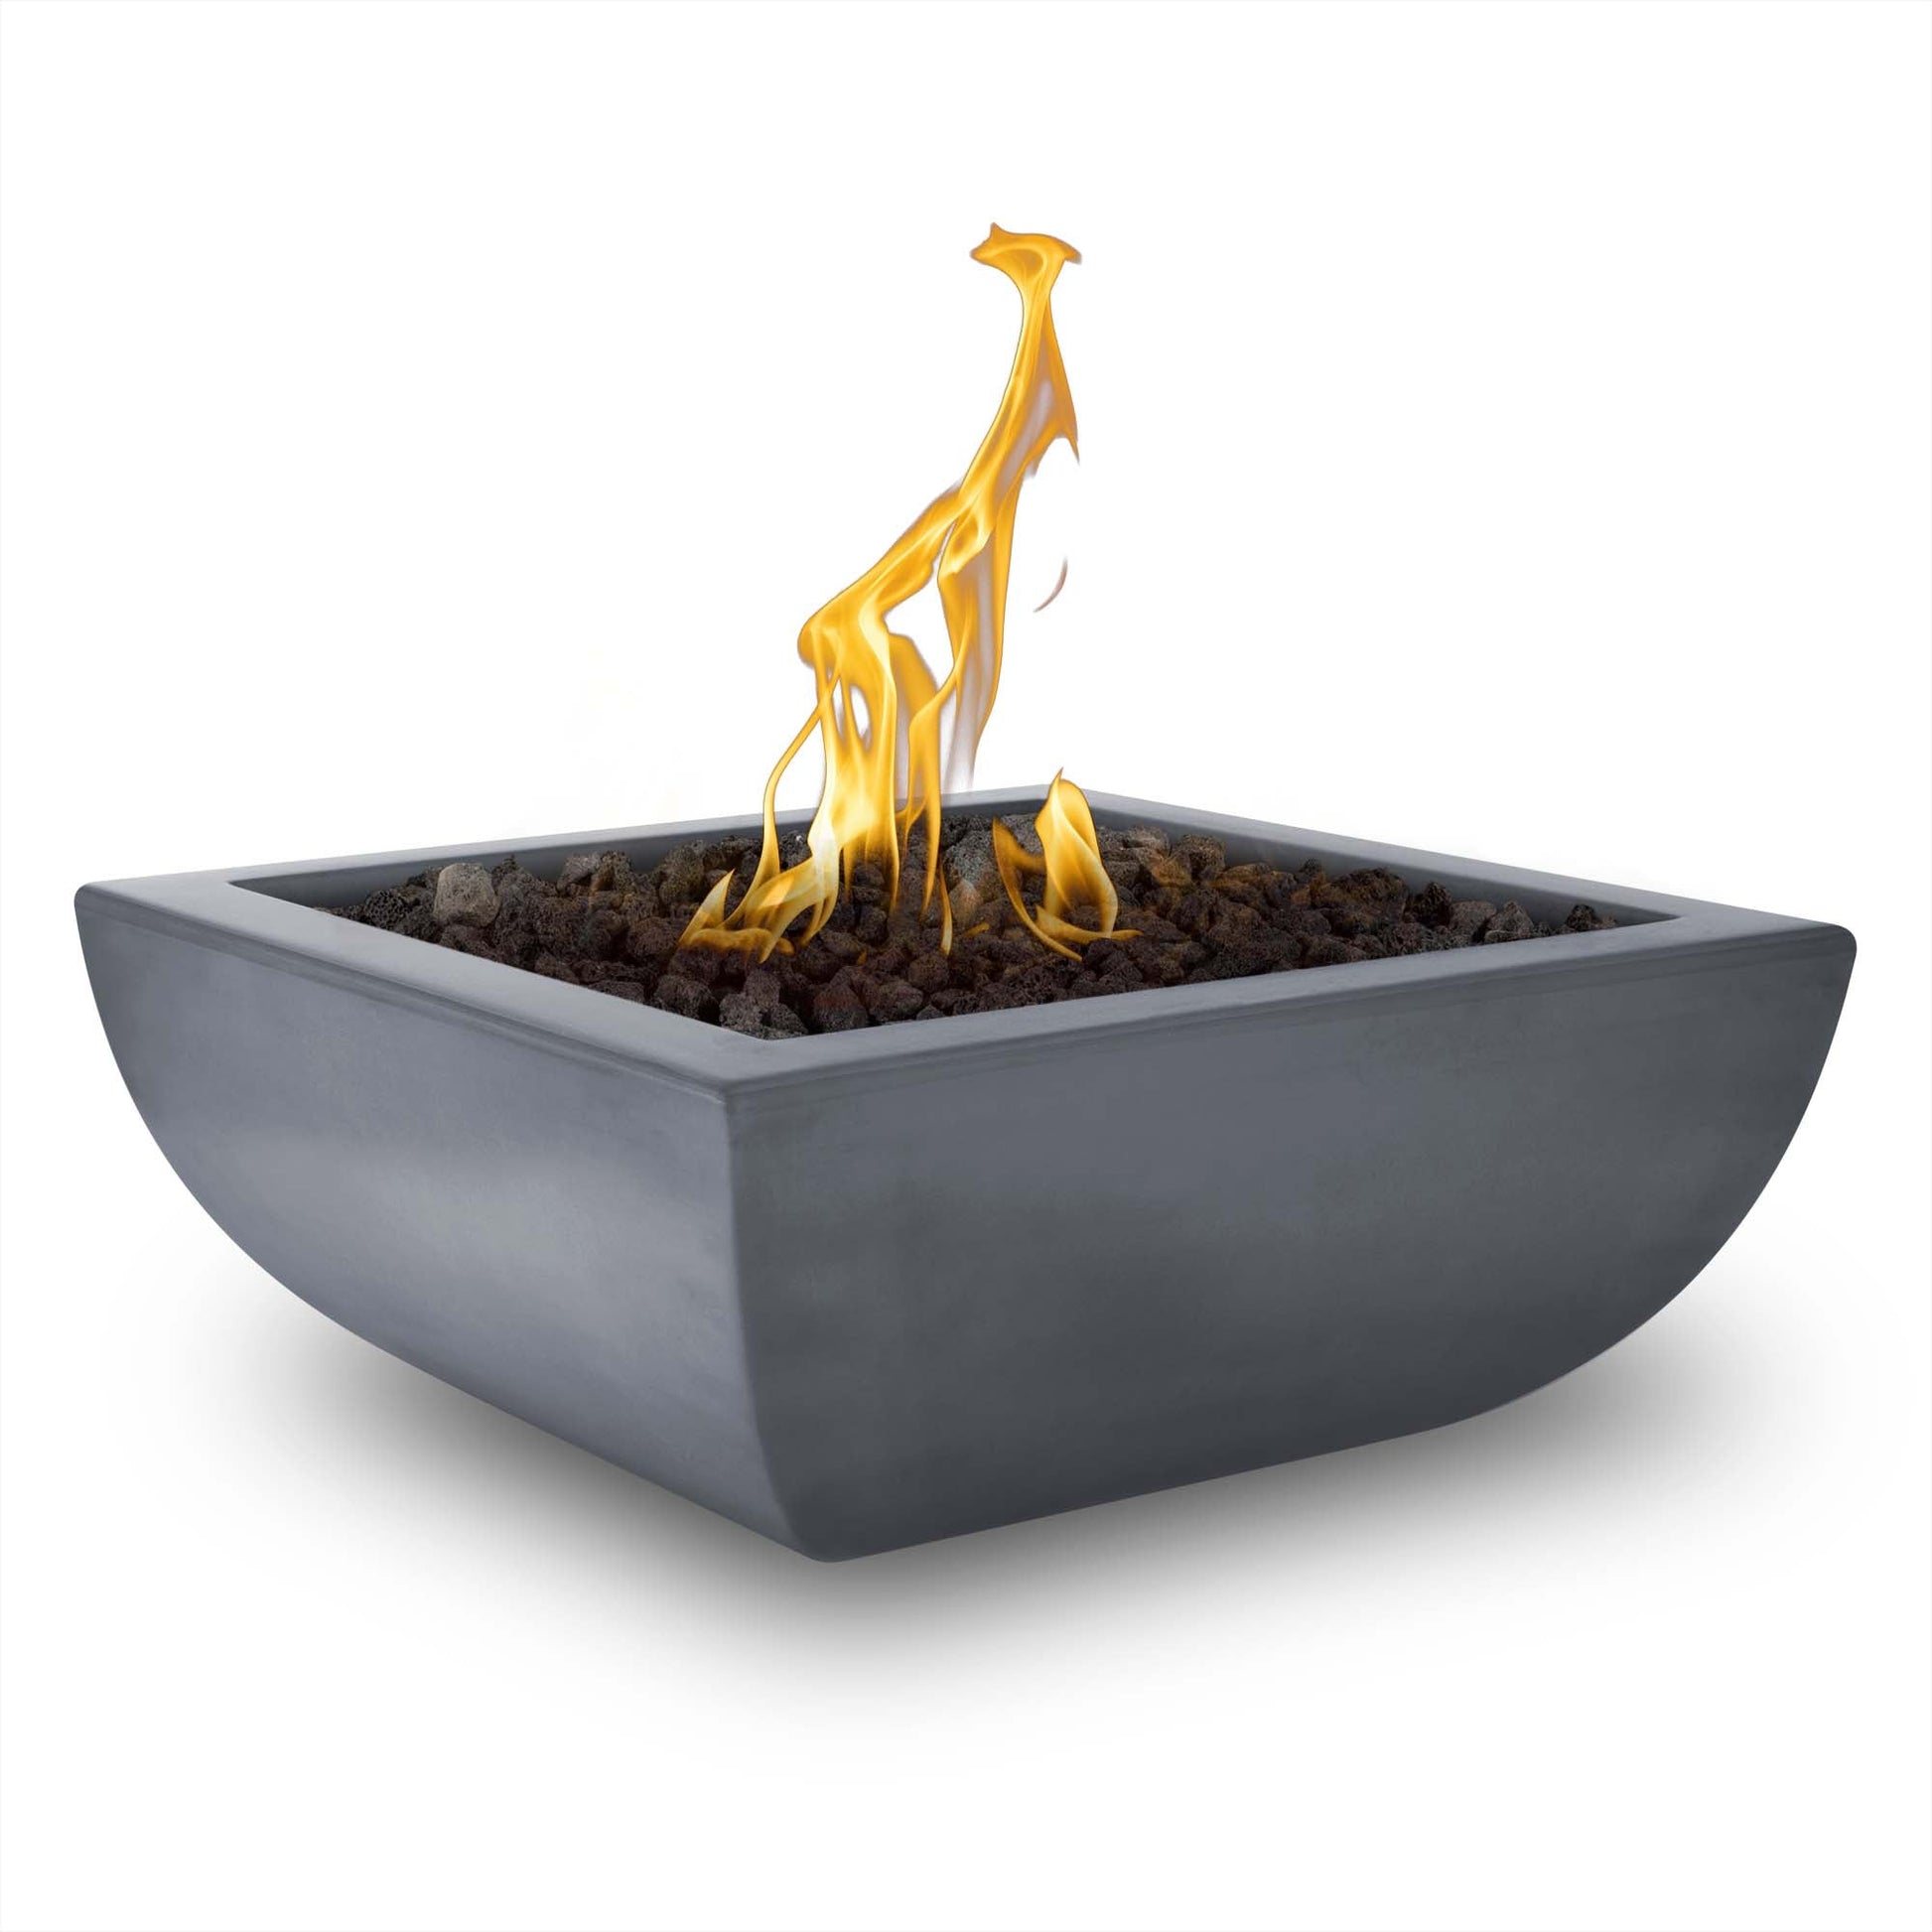 The Outdoor Plus Square Avalon 30" Black GFRC Concrete Natural Gas Fire Bowl with Match Lit with Flame Sense Ignition